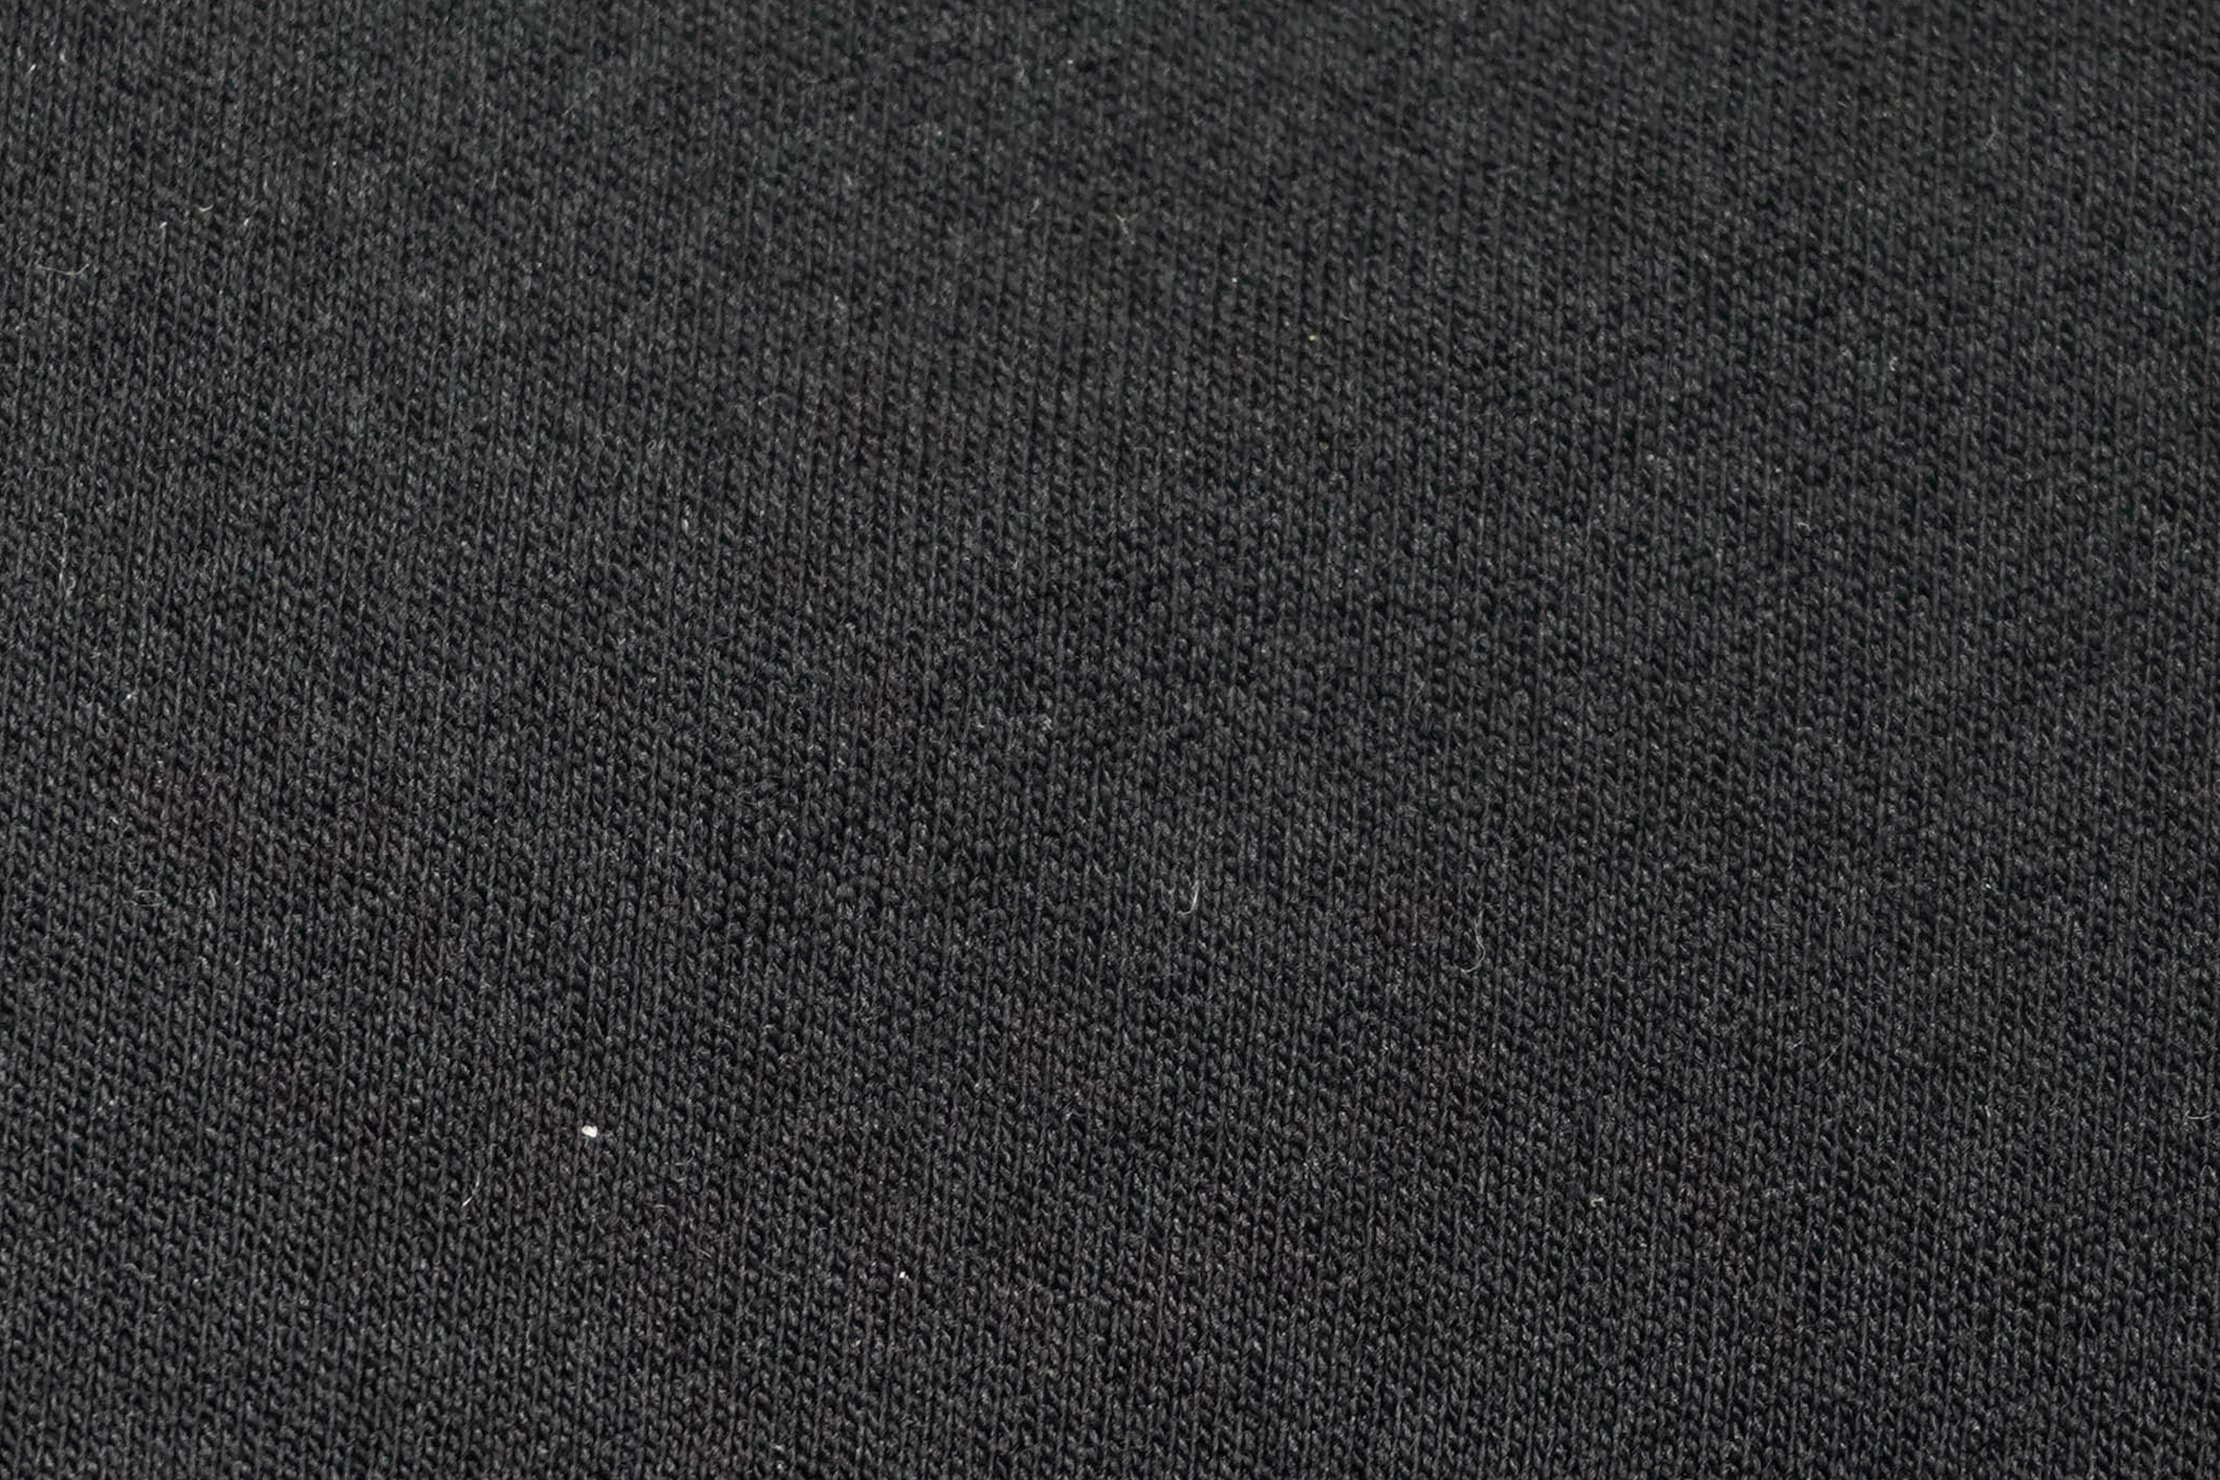 Wool & Prince Heavy Crew Neck Material